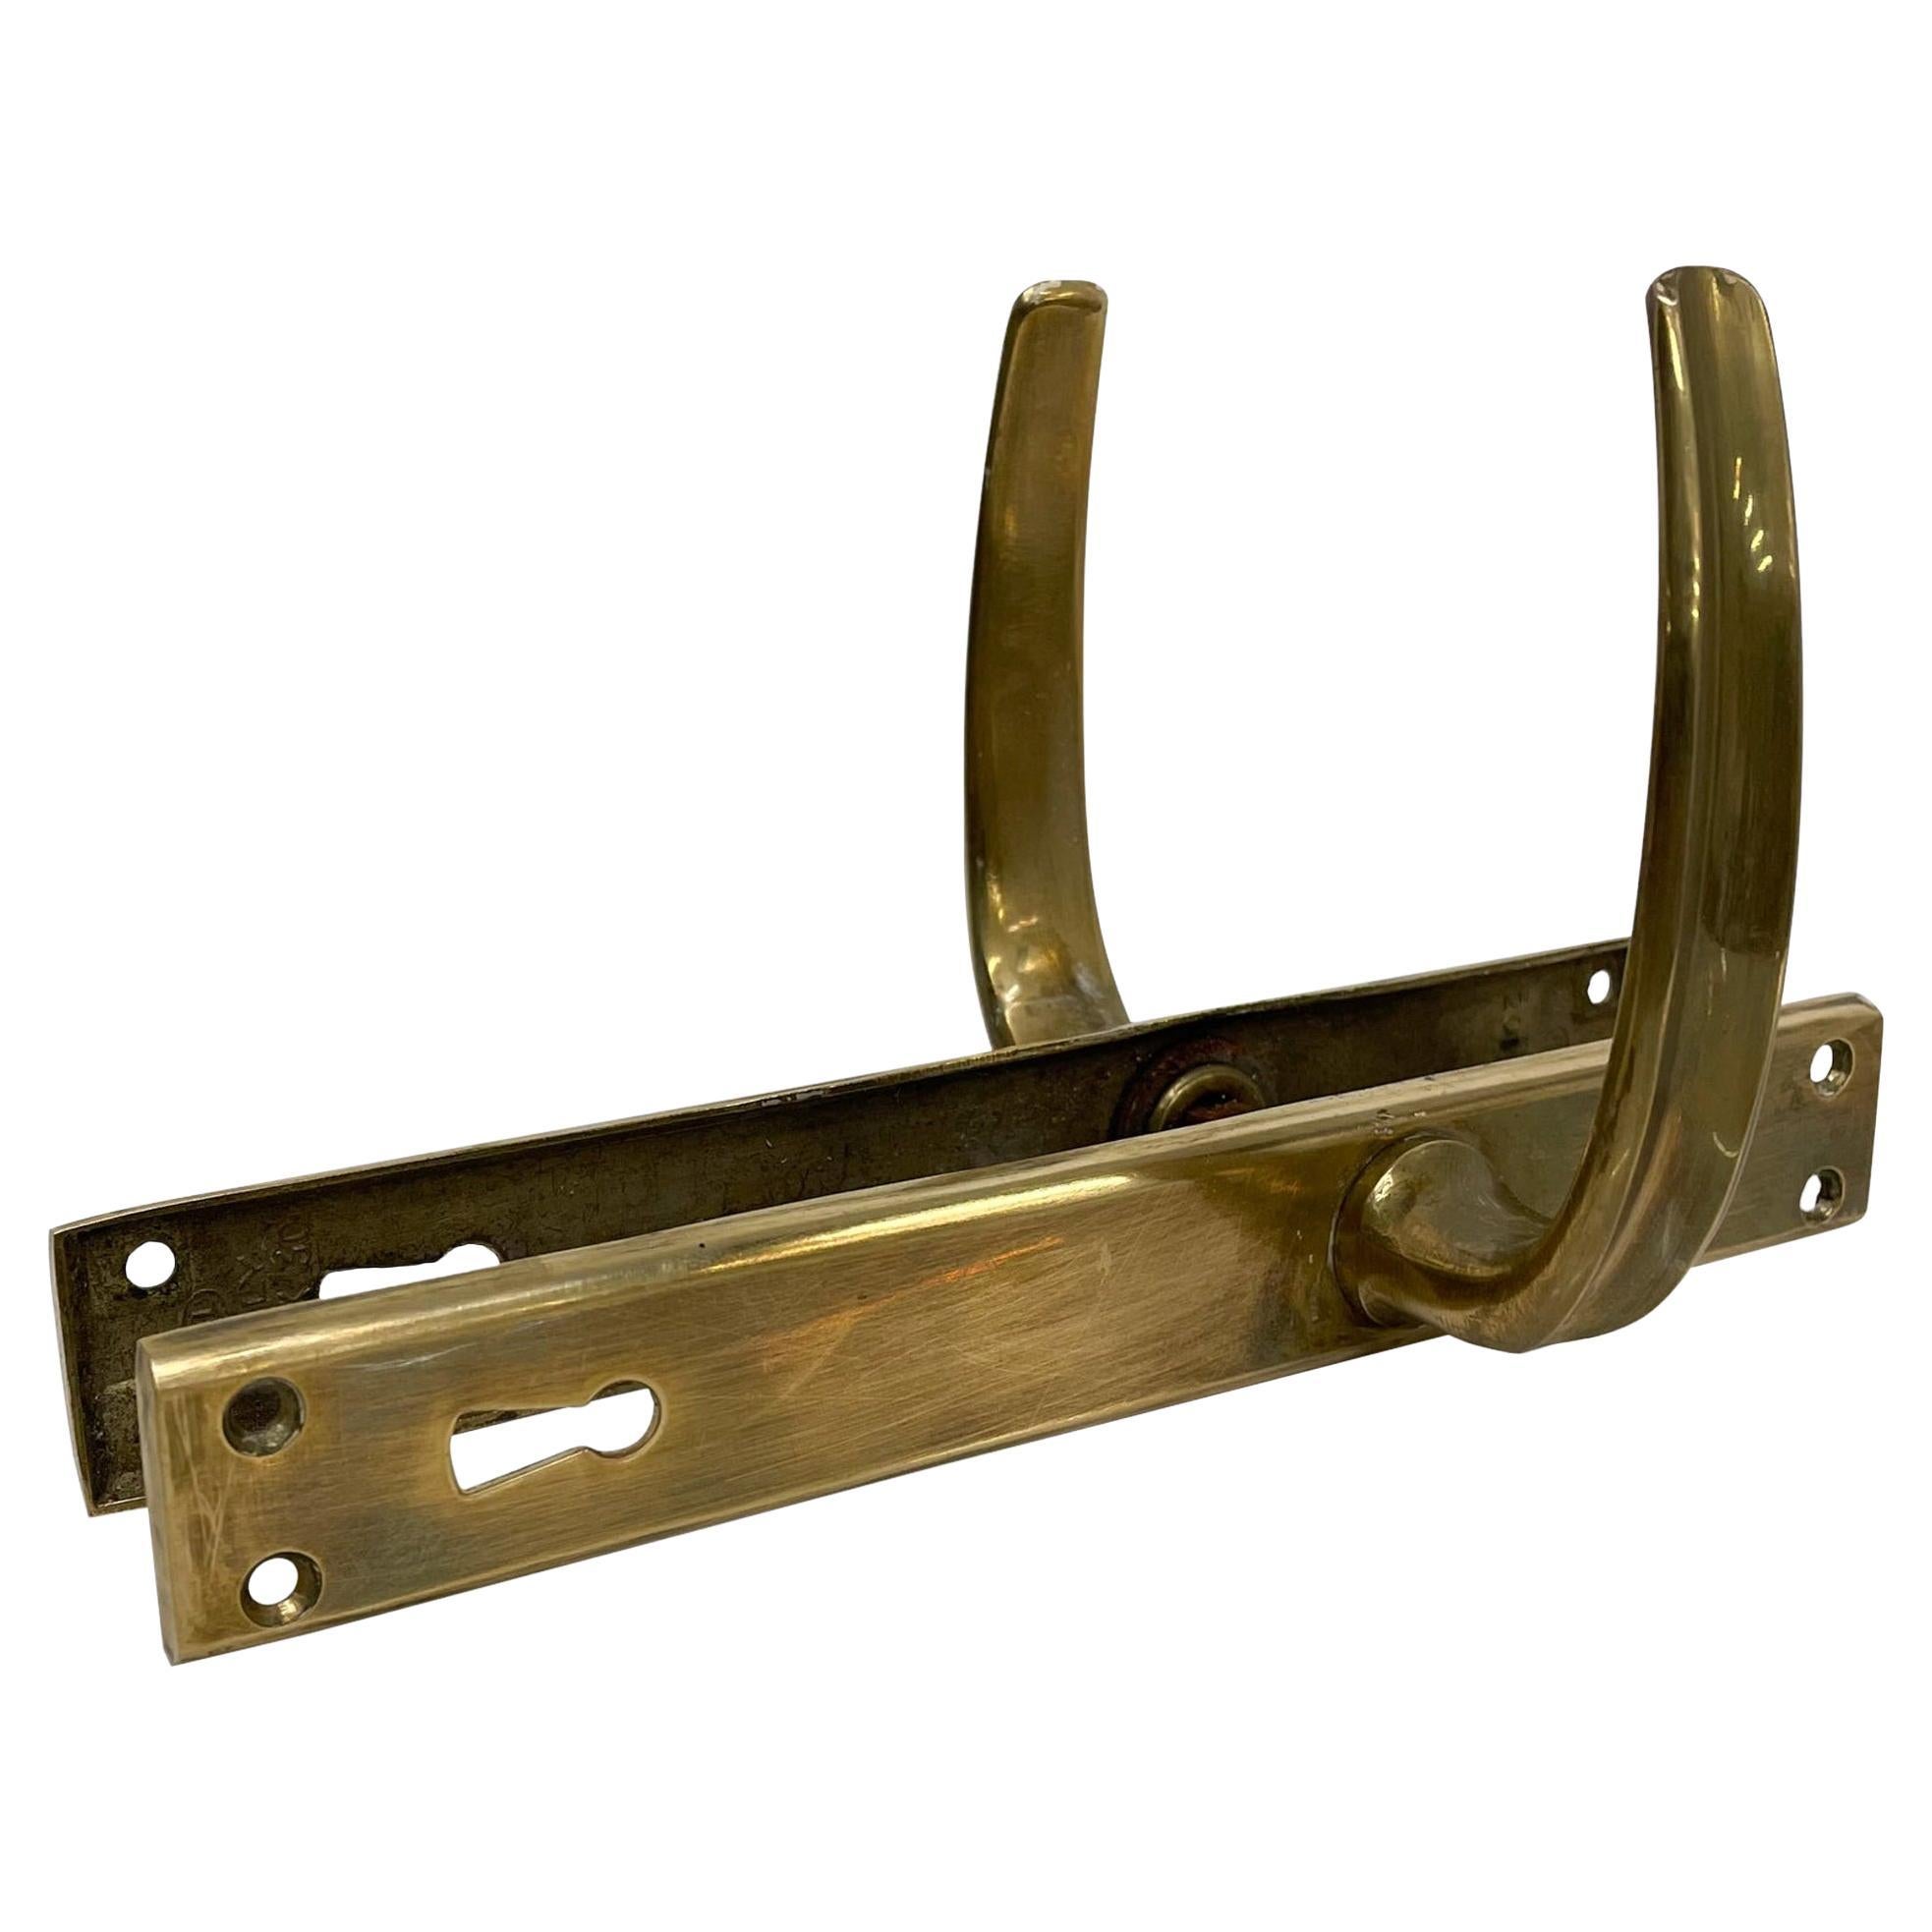 Midcentury Modern Italian Door Plate & Pull Handle in Rich Brass ITALY 1950s
Note seven units (7) are available. All are sold individually.
In the style of Gio Ponti
8 tall x 1.25 W plate, 4L x .75 thick
Original Preowned Vintage Good